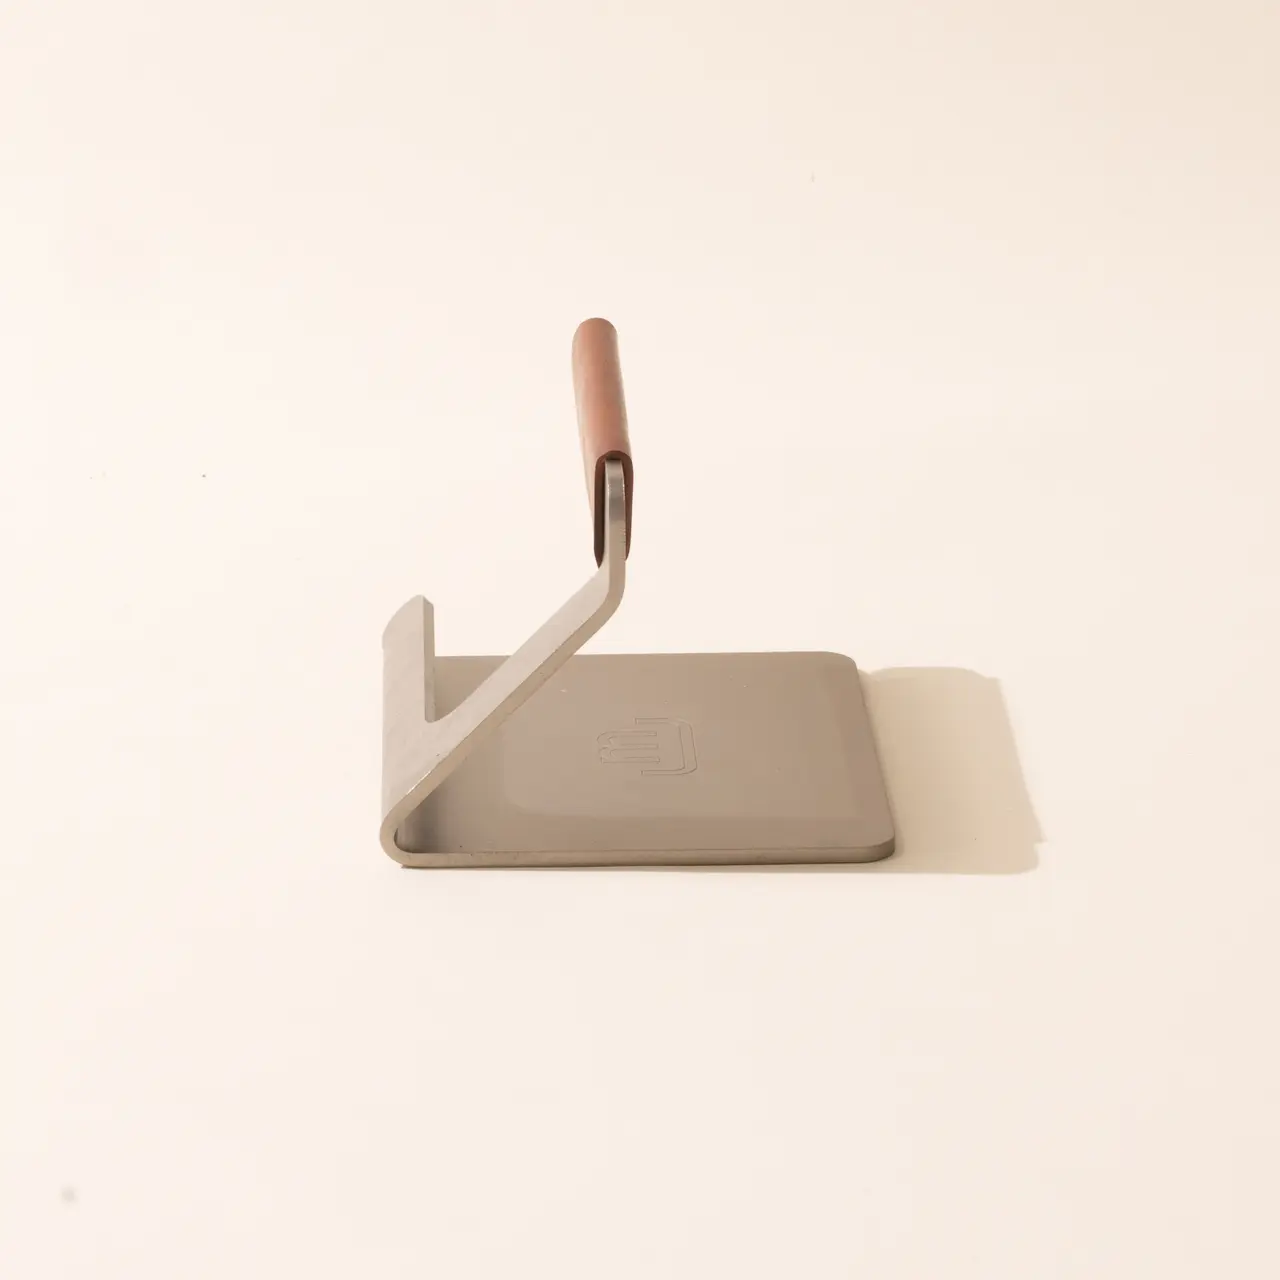 A metal dustpan with a wooden handle is leaning against a pale wall on a beige surface.